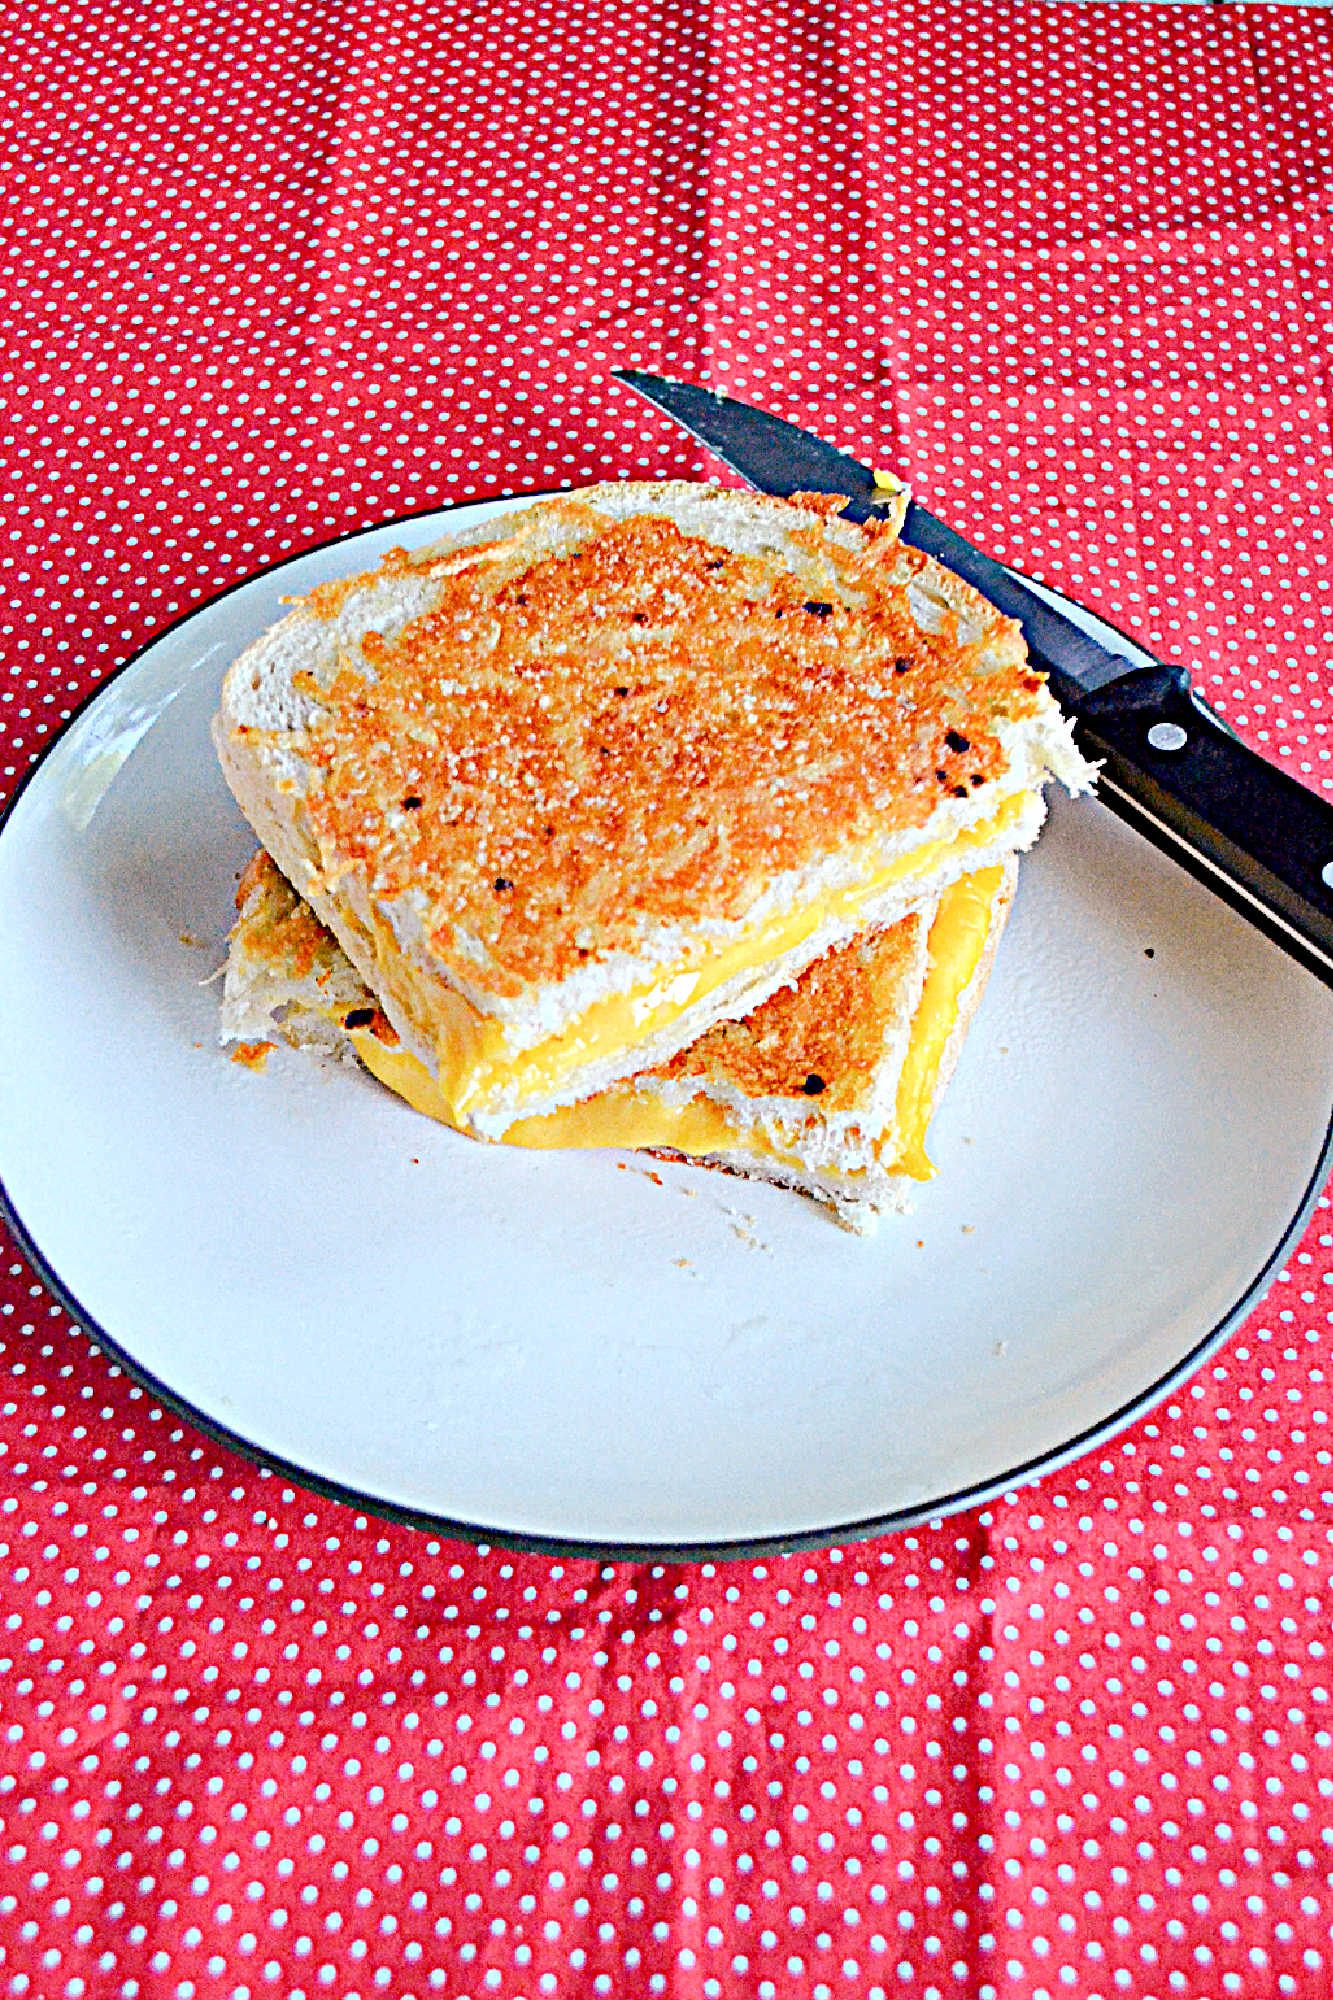 Kids and adults will love this delicious Gourmet Grilled Cheese with two cheeses on the inside and a garlic butter and parmesan encrusted bread on the outside.